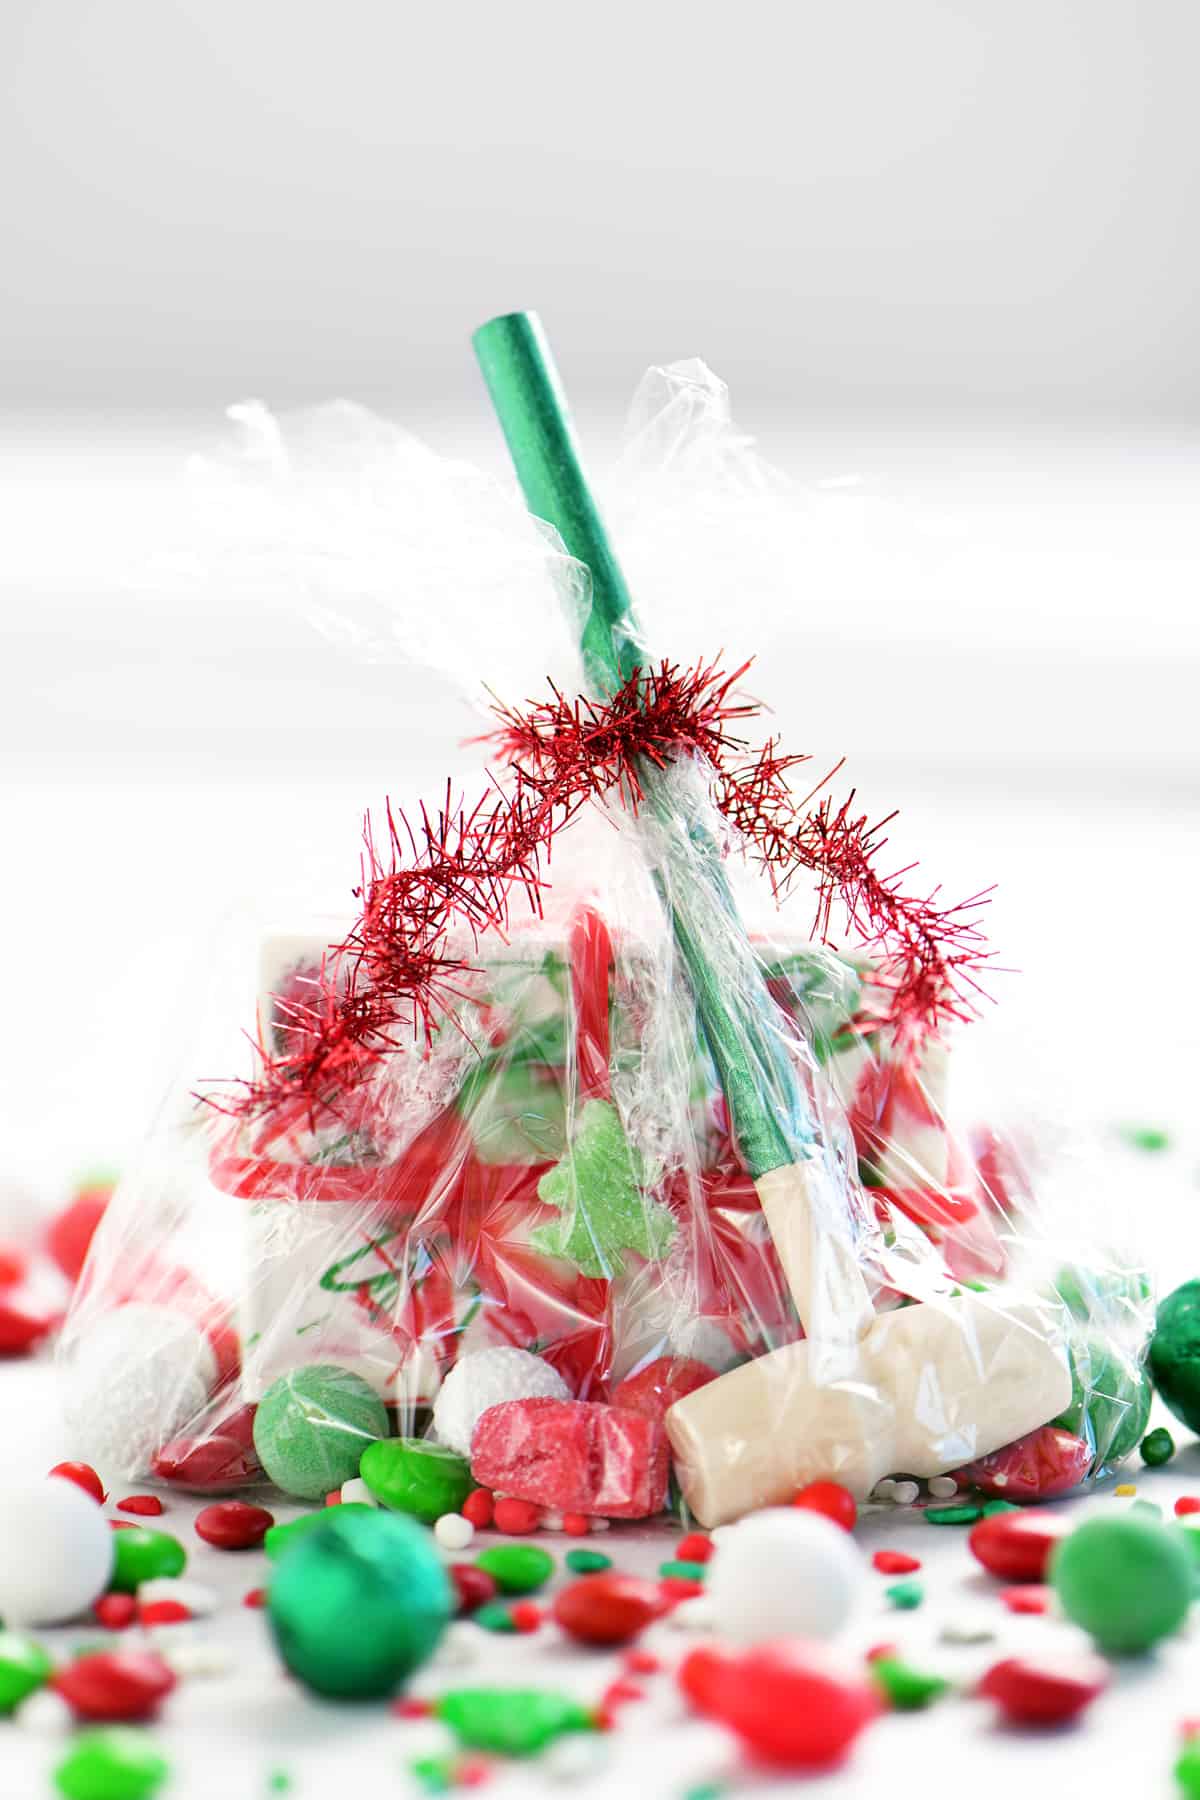 cellophane gift bag with candy and a small wooden mallet